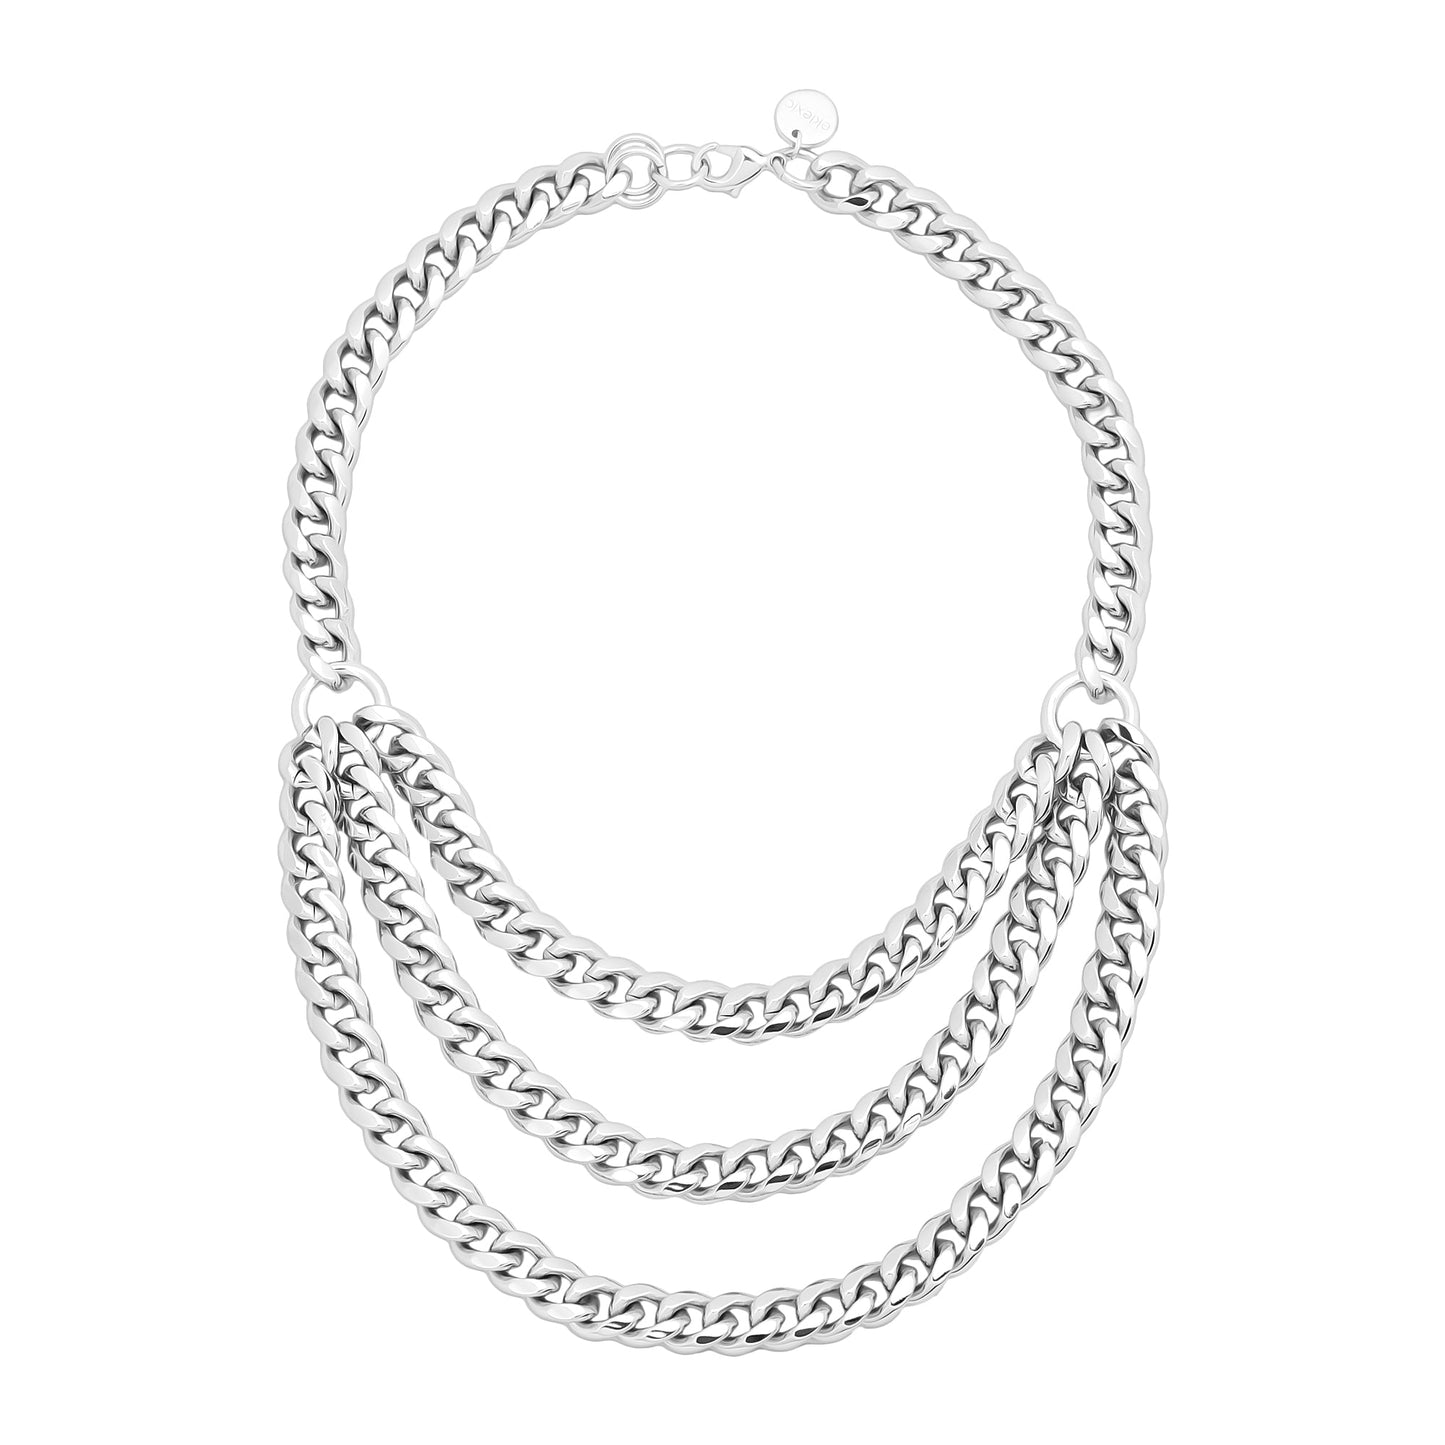 Triple Threat 3 Layer Curb Chain Necklace | Gold or Silver | Eklexic Jewelry